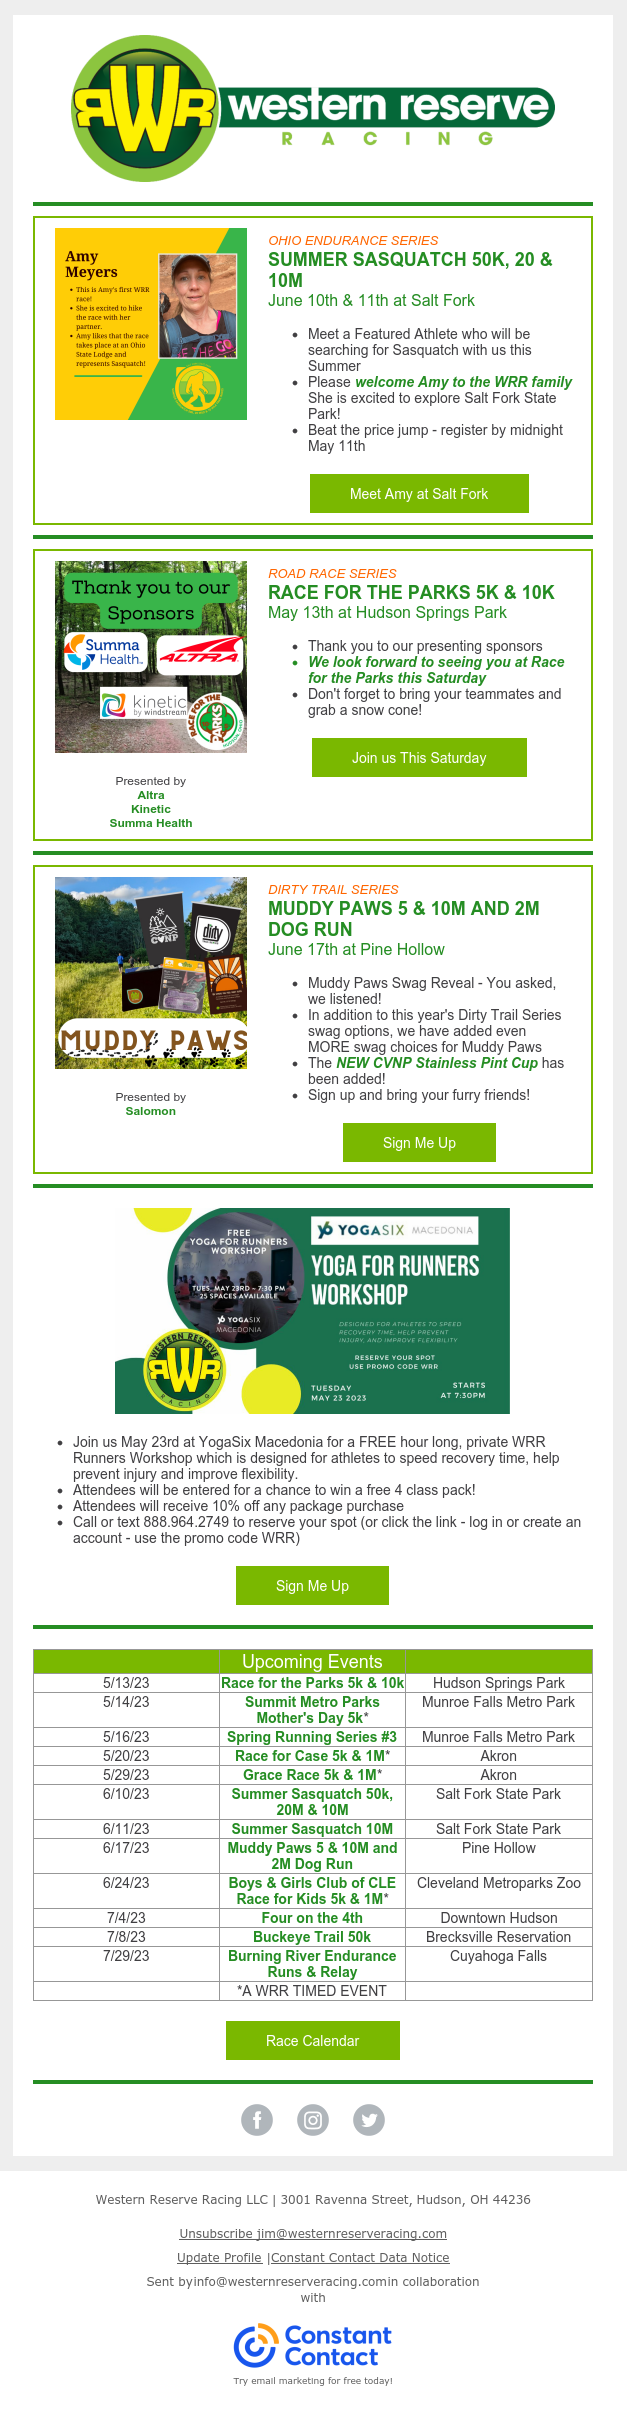 Meet Amy and check out New Swag for Muddy Paws too!